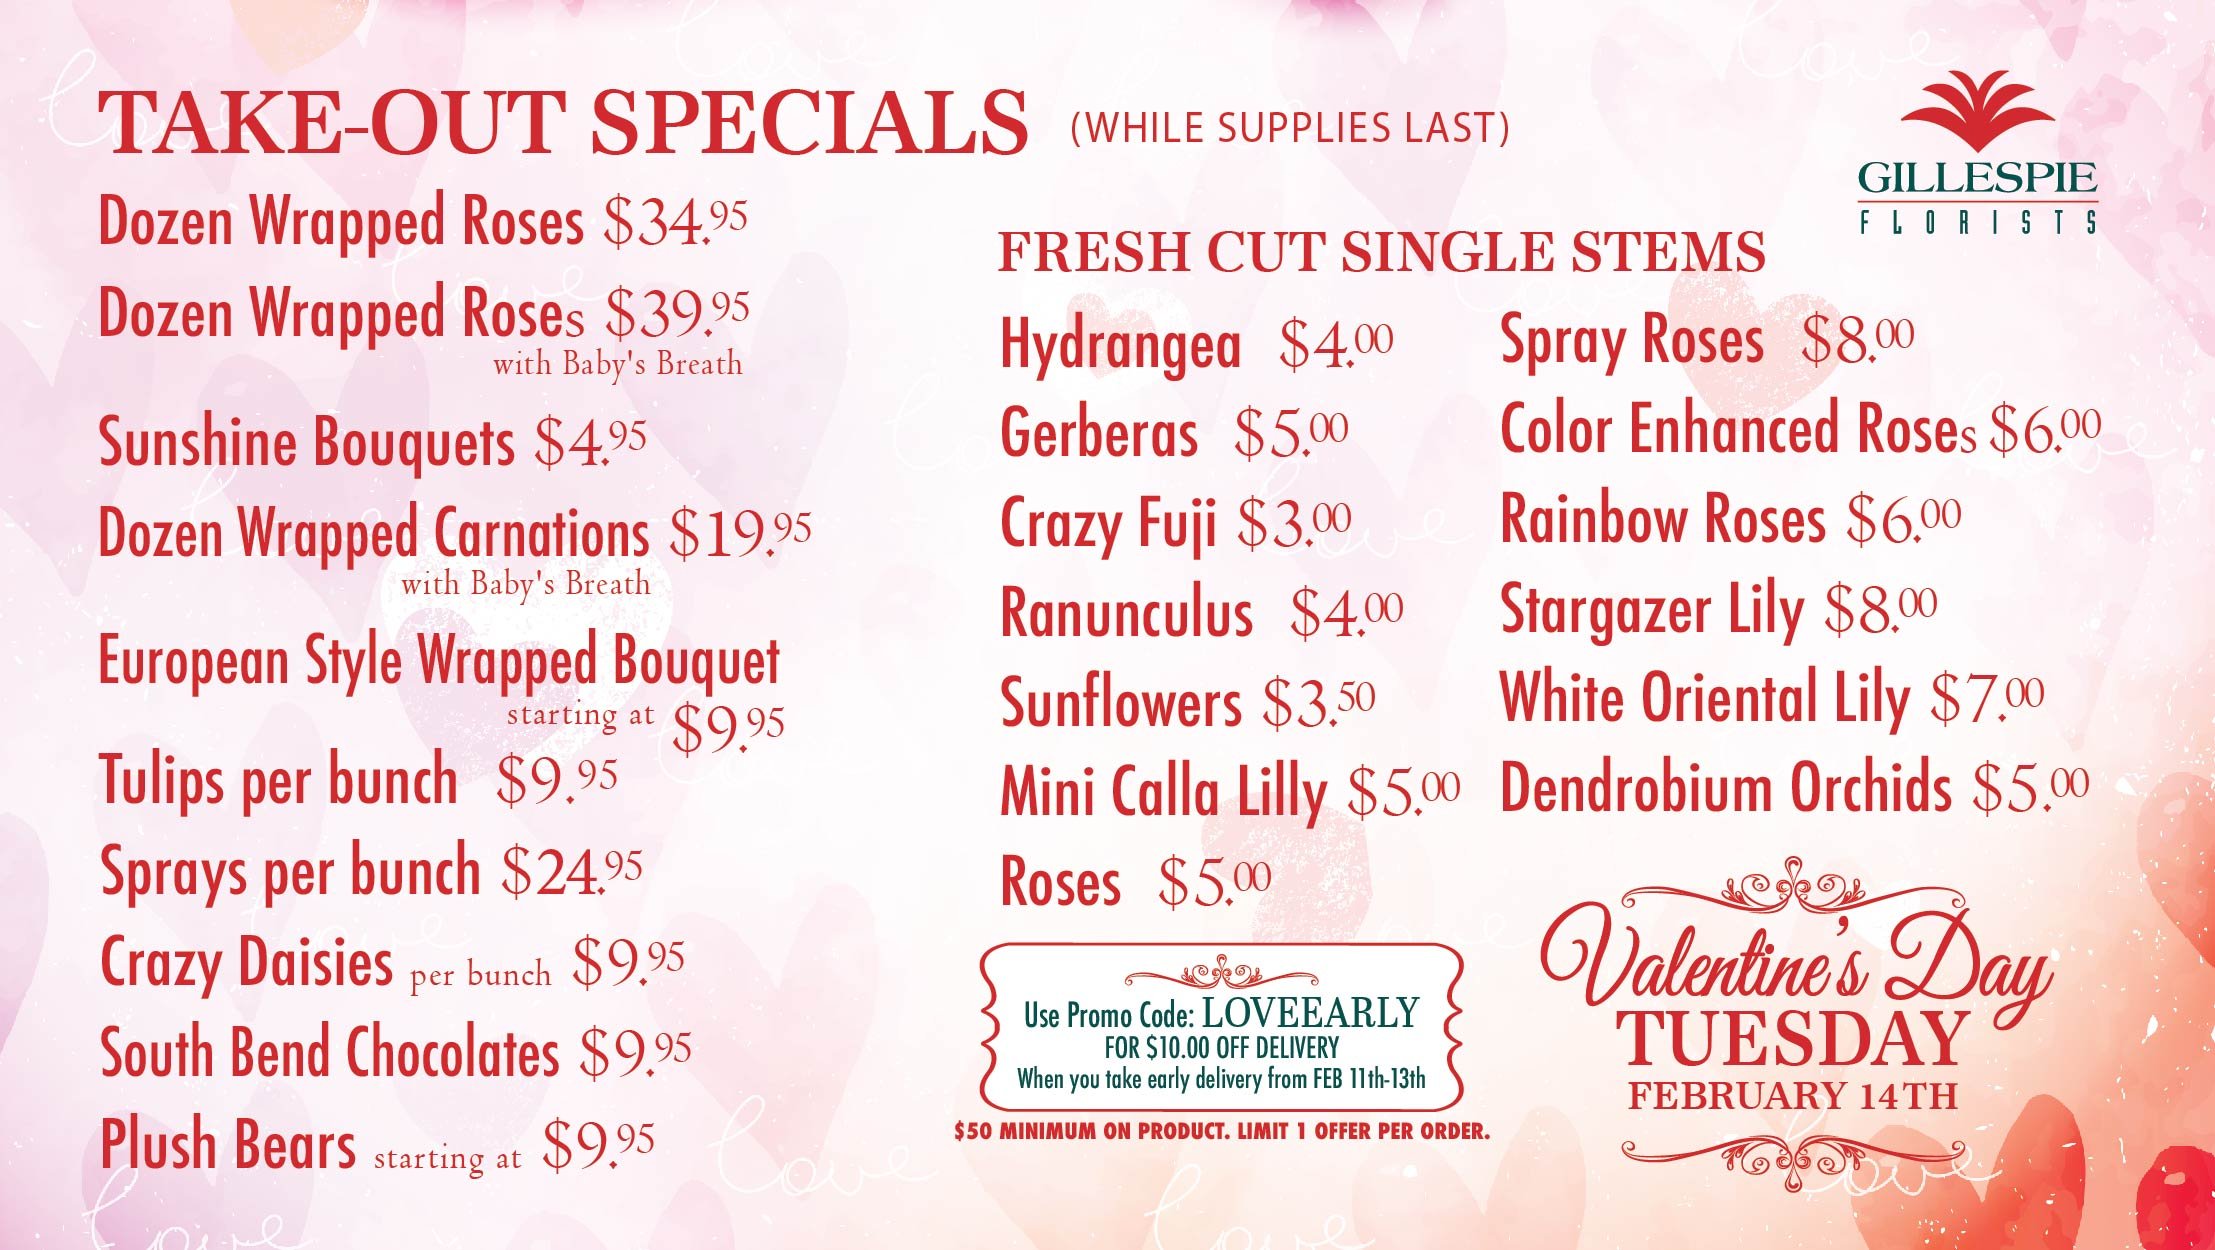 TakeoutSpecials_Vday23-01